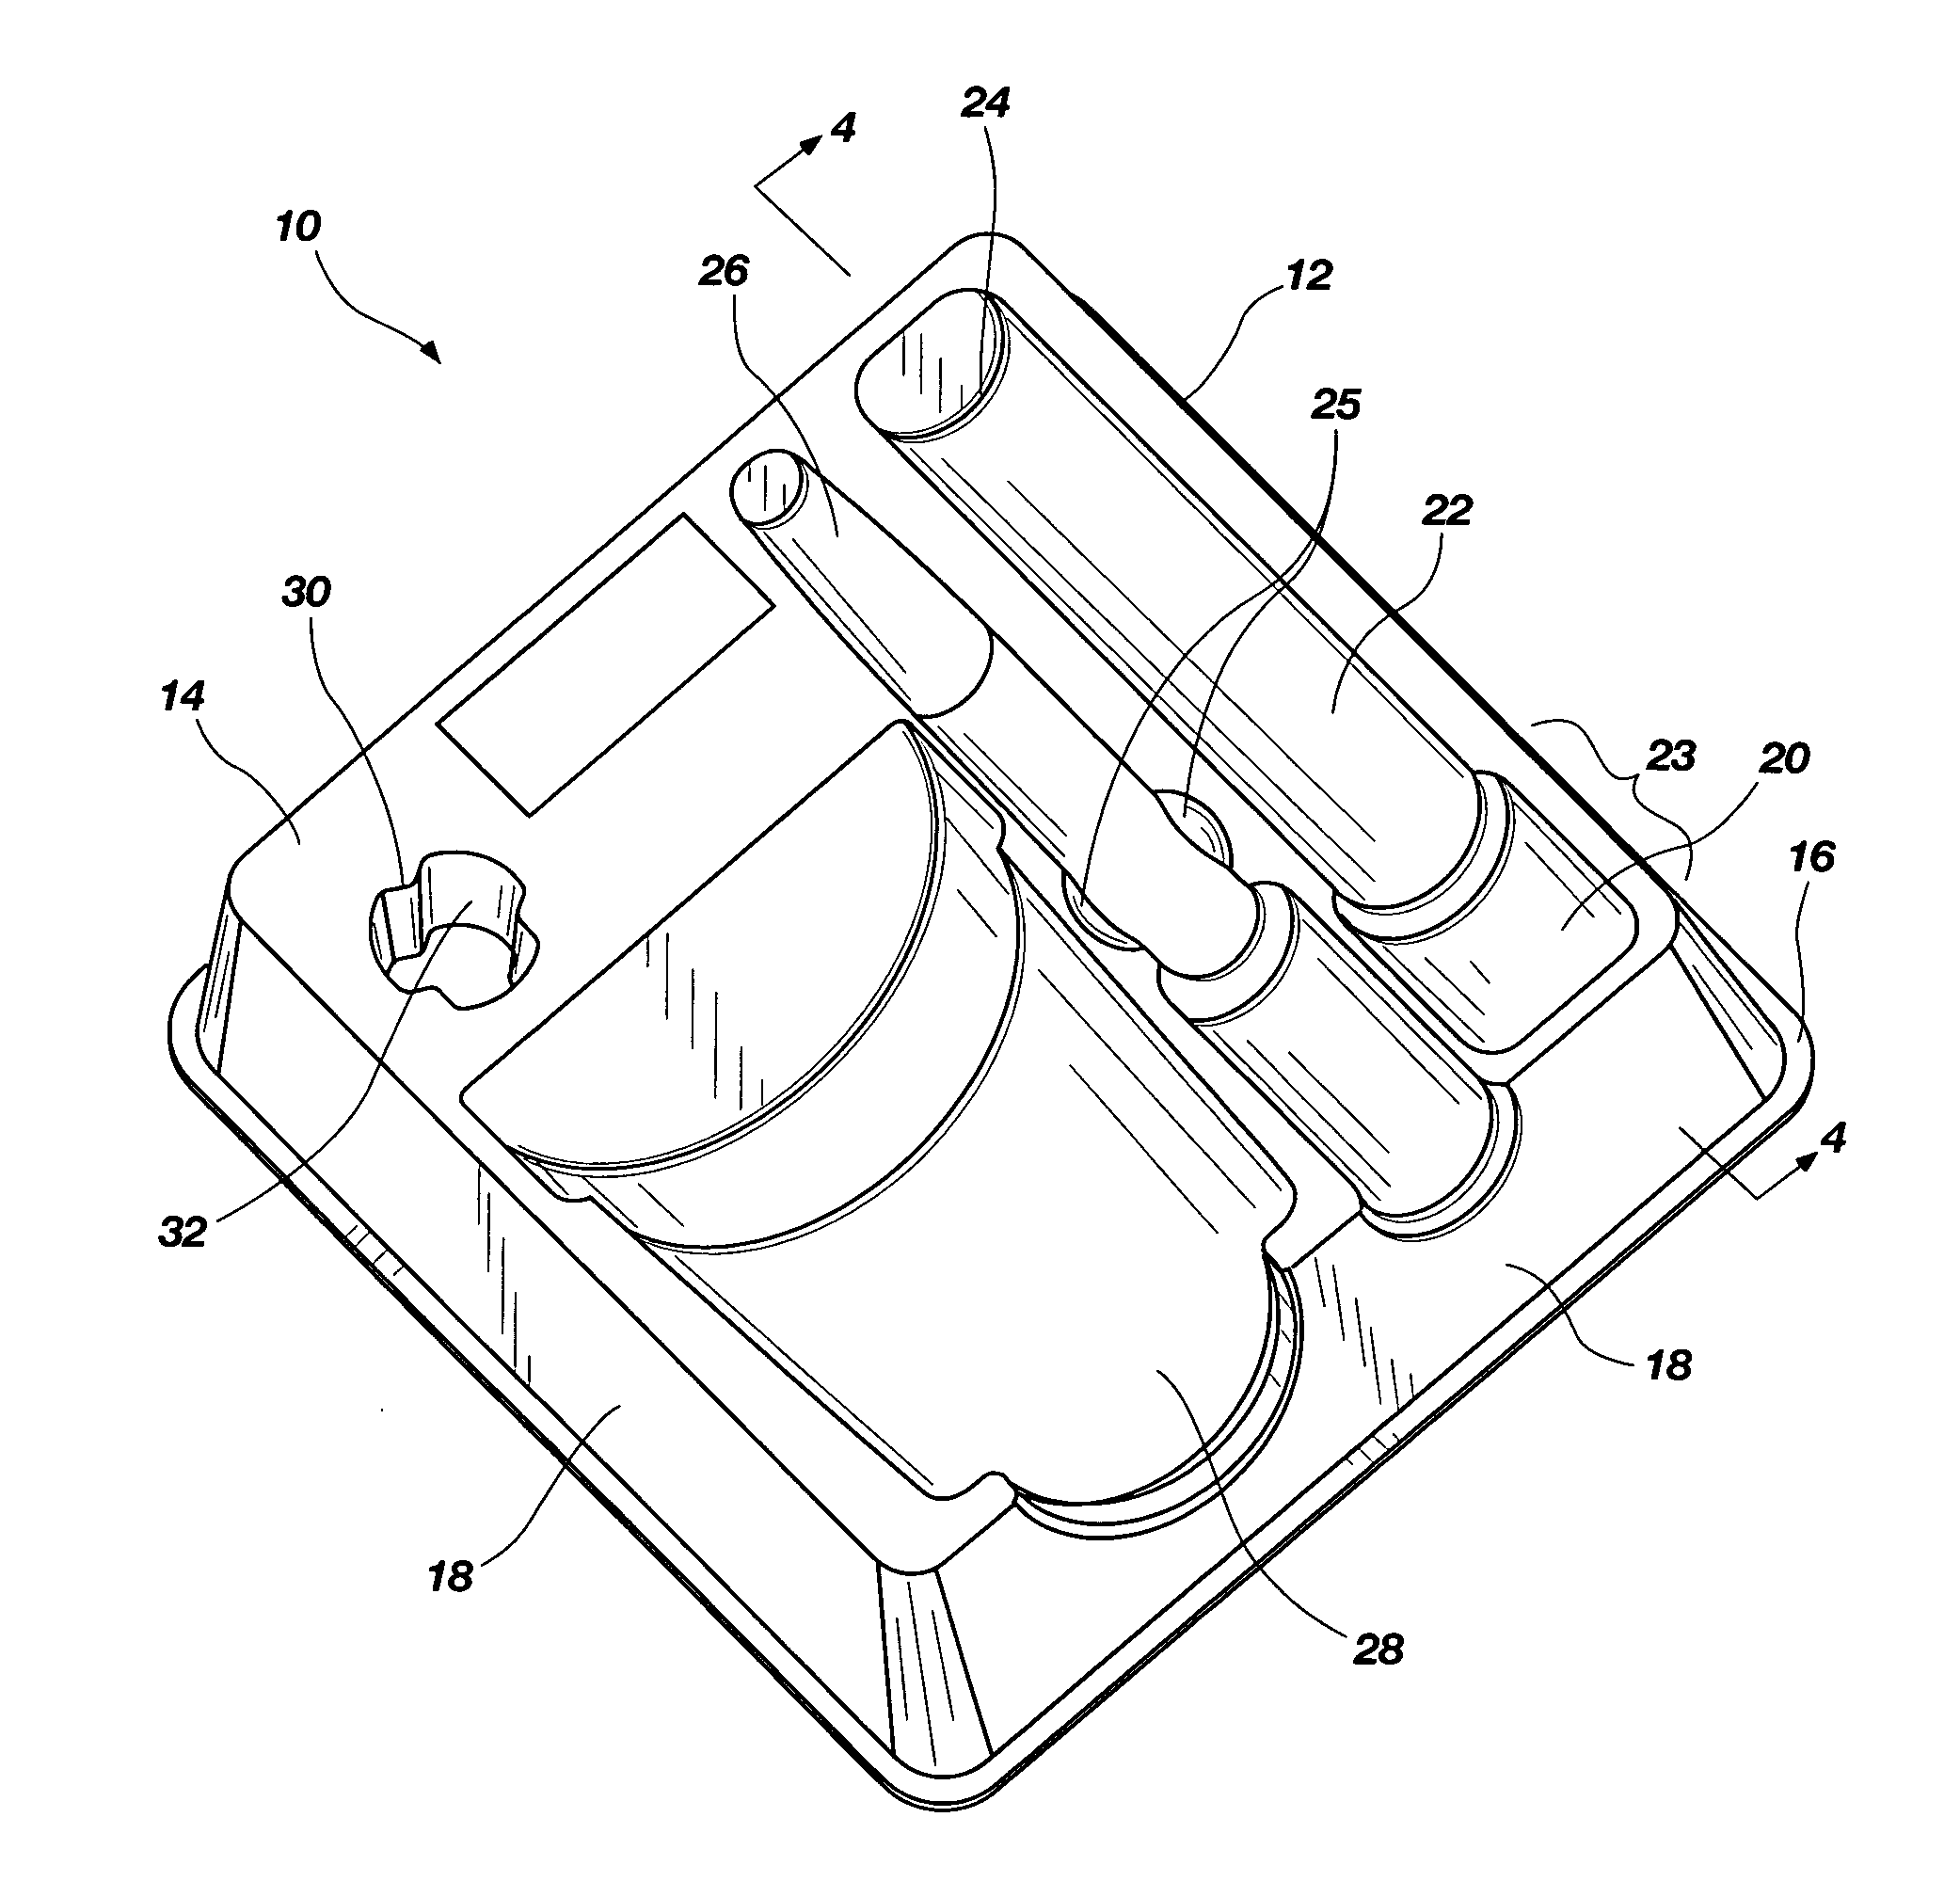 Methods and apparatus for specimen collection and transport